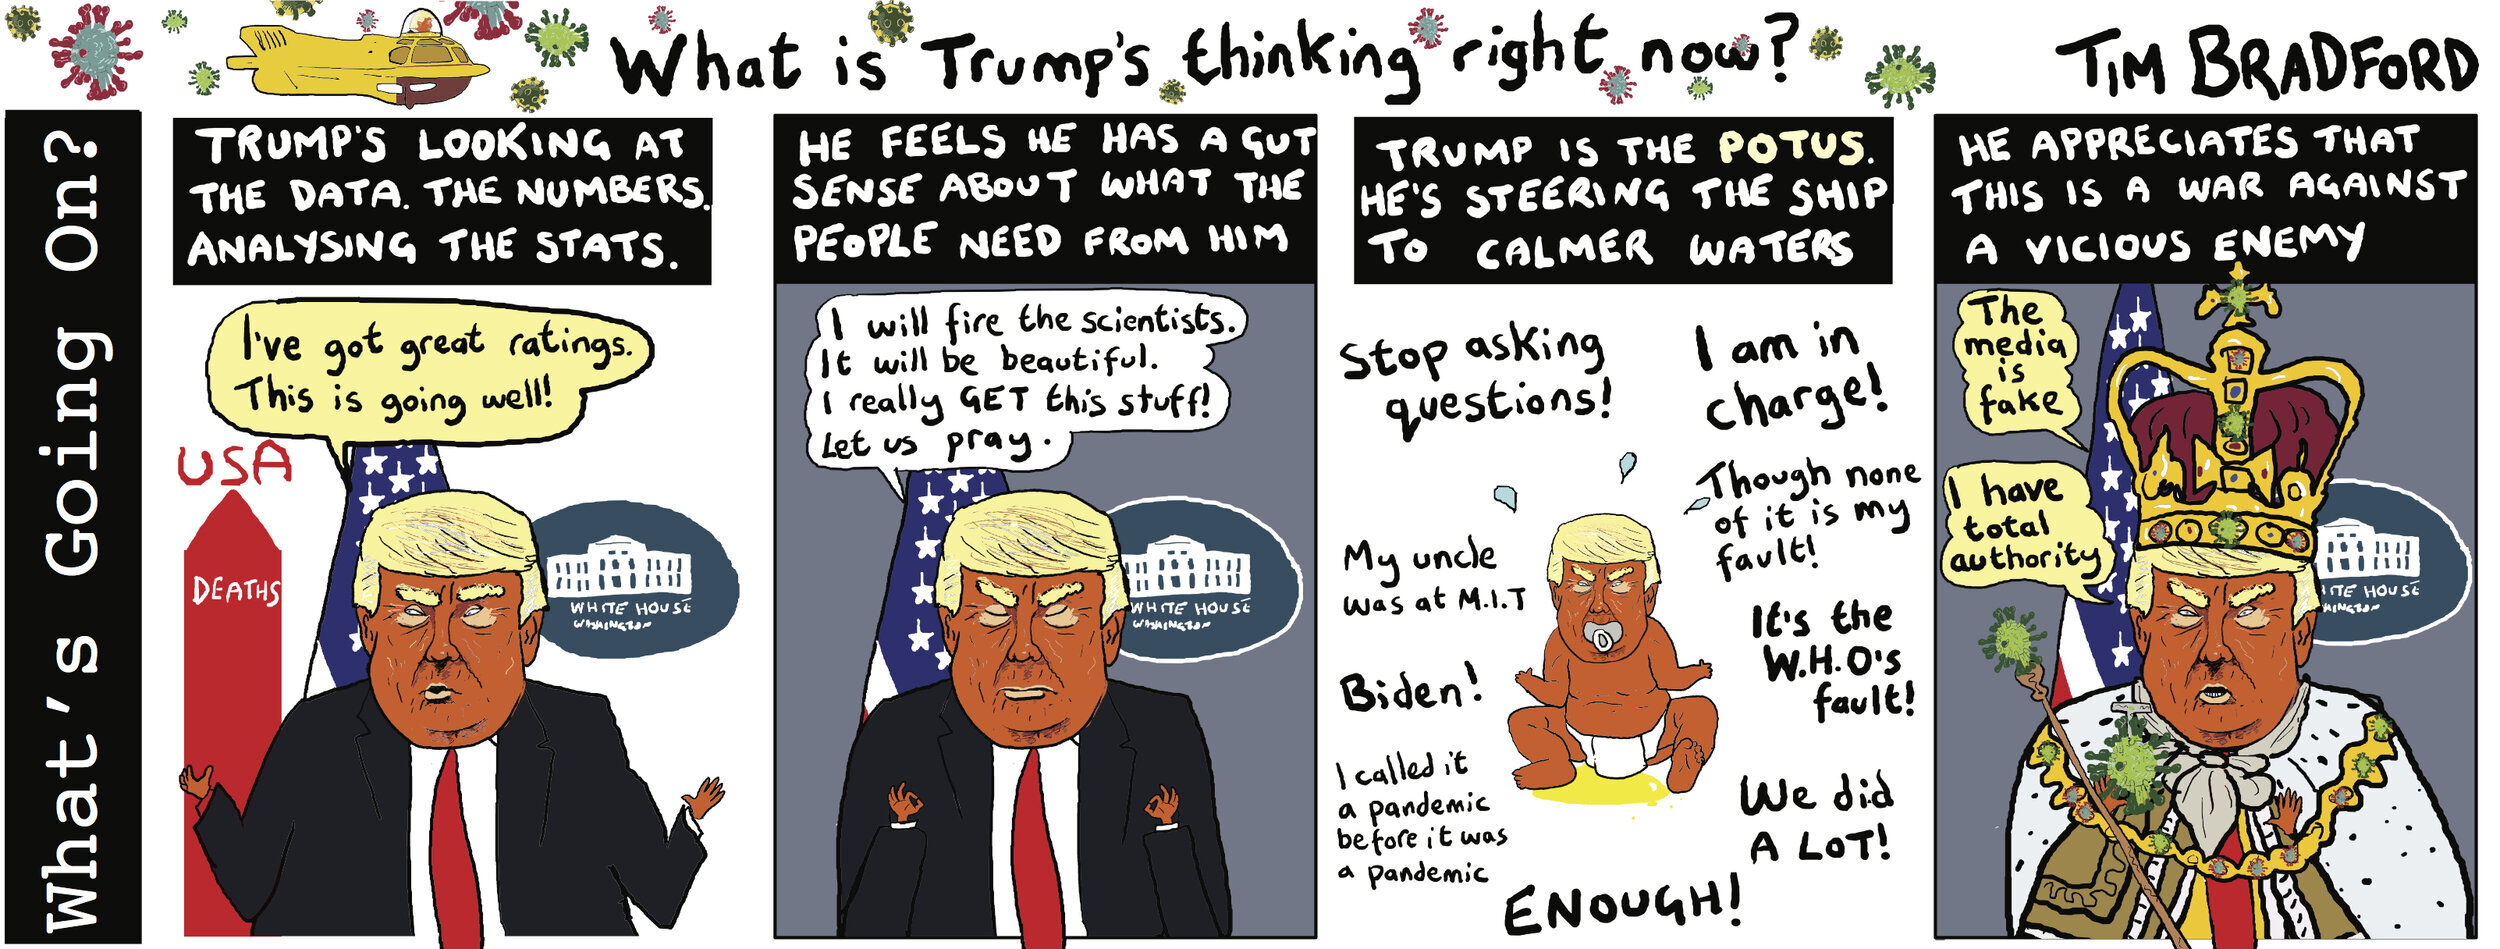 What is Trump's thinking right now? - 07/04/2020